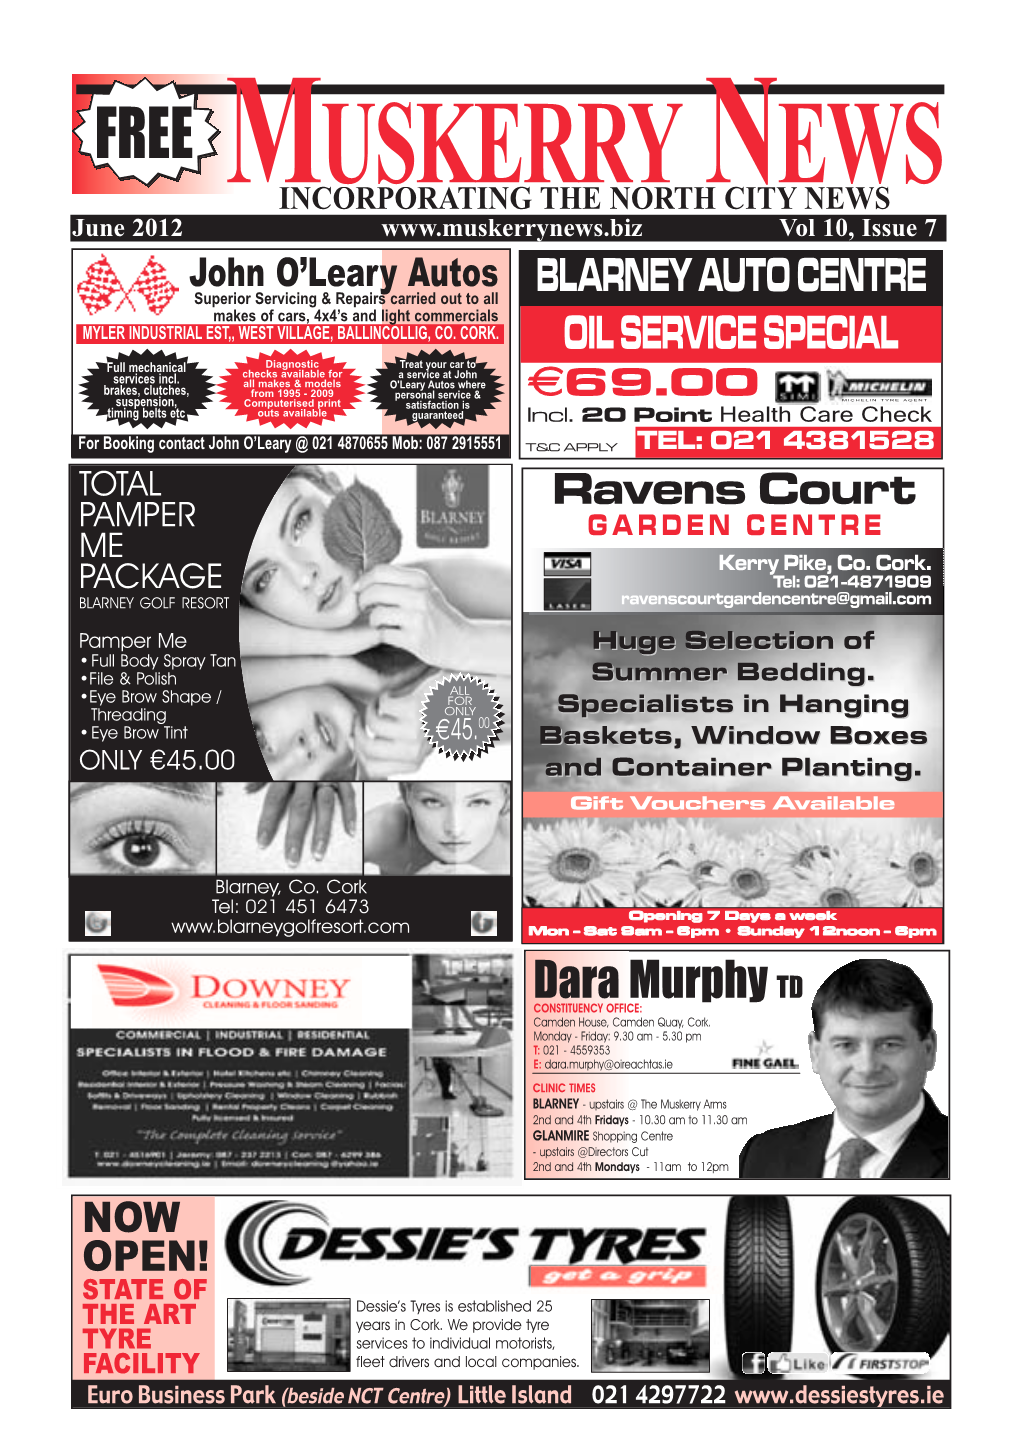 Phone 087 2330398 Muskerry News the July Edition of the Muskerry News Will Be Published on Friday July 13Th and Closing Date for Submissions Is Friday July 6Th